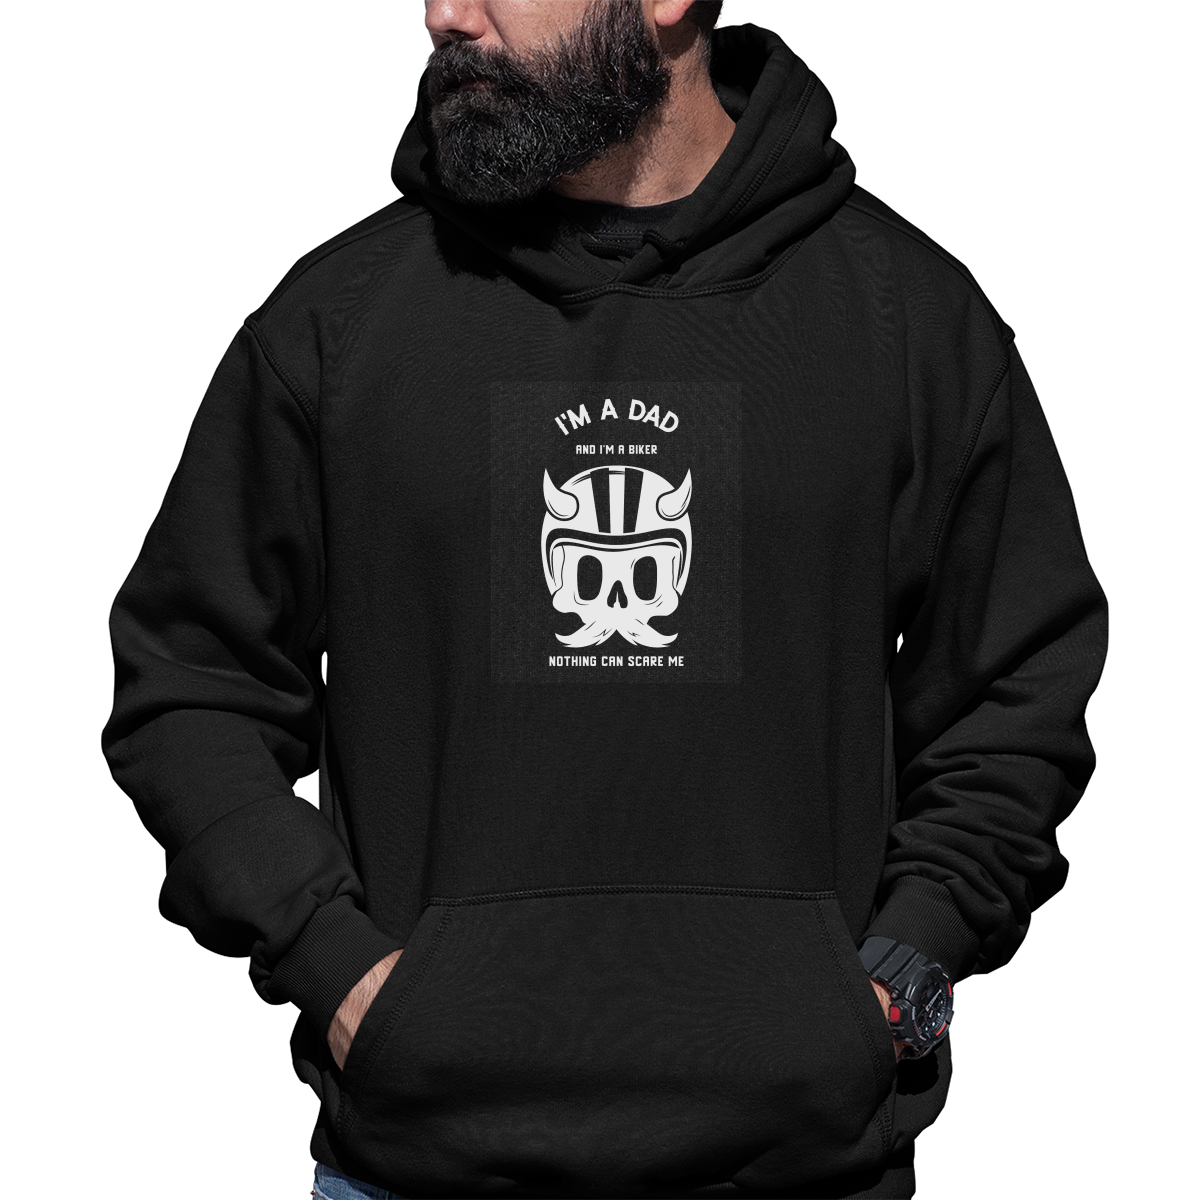 I'm a dad and a biker Unisex Hoodie | Black